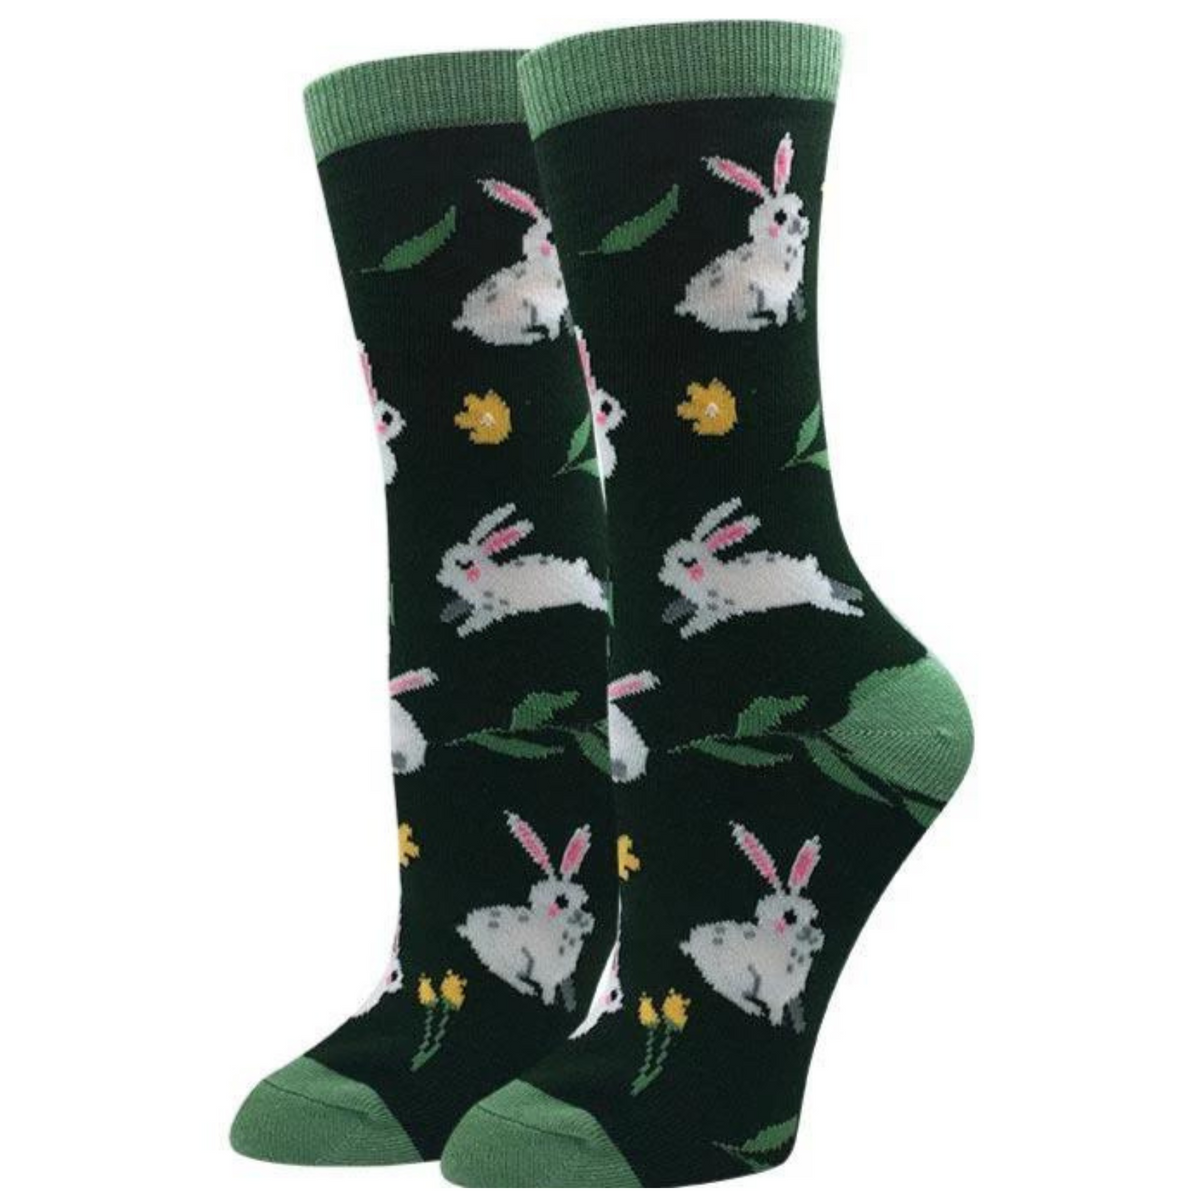 Sock Harbor Bunny women&#39;s crew sock featuring green sock with white bunny rabbits all over shown on display feet